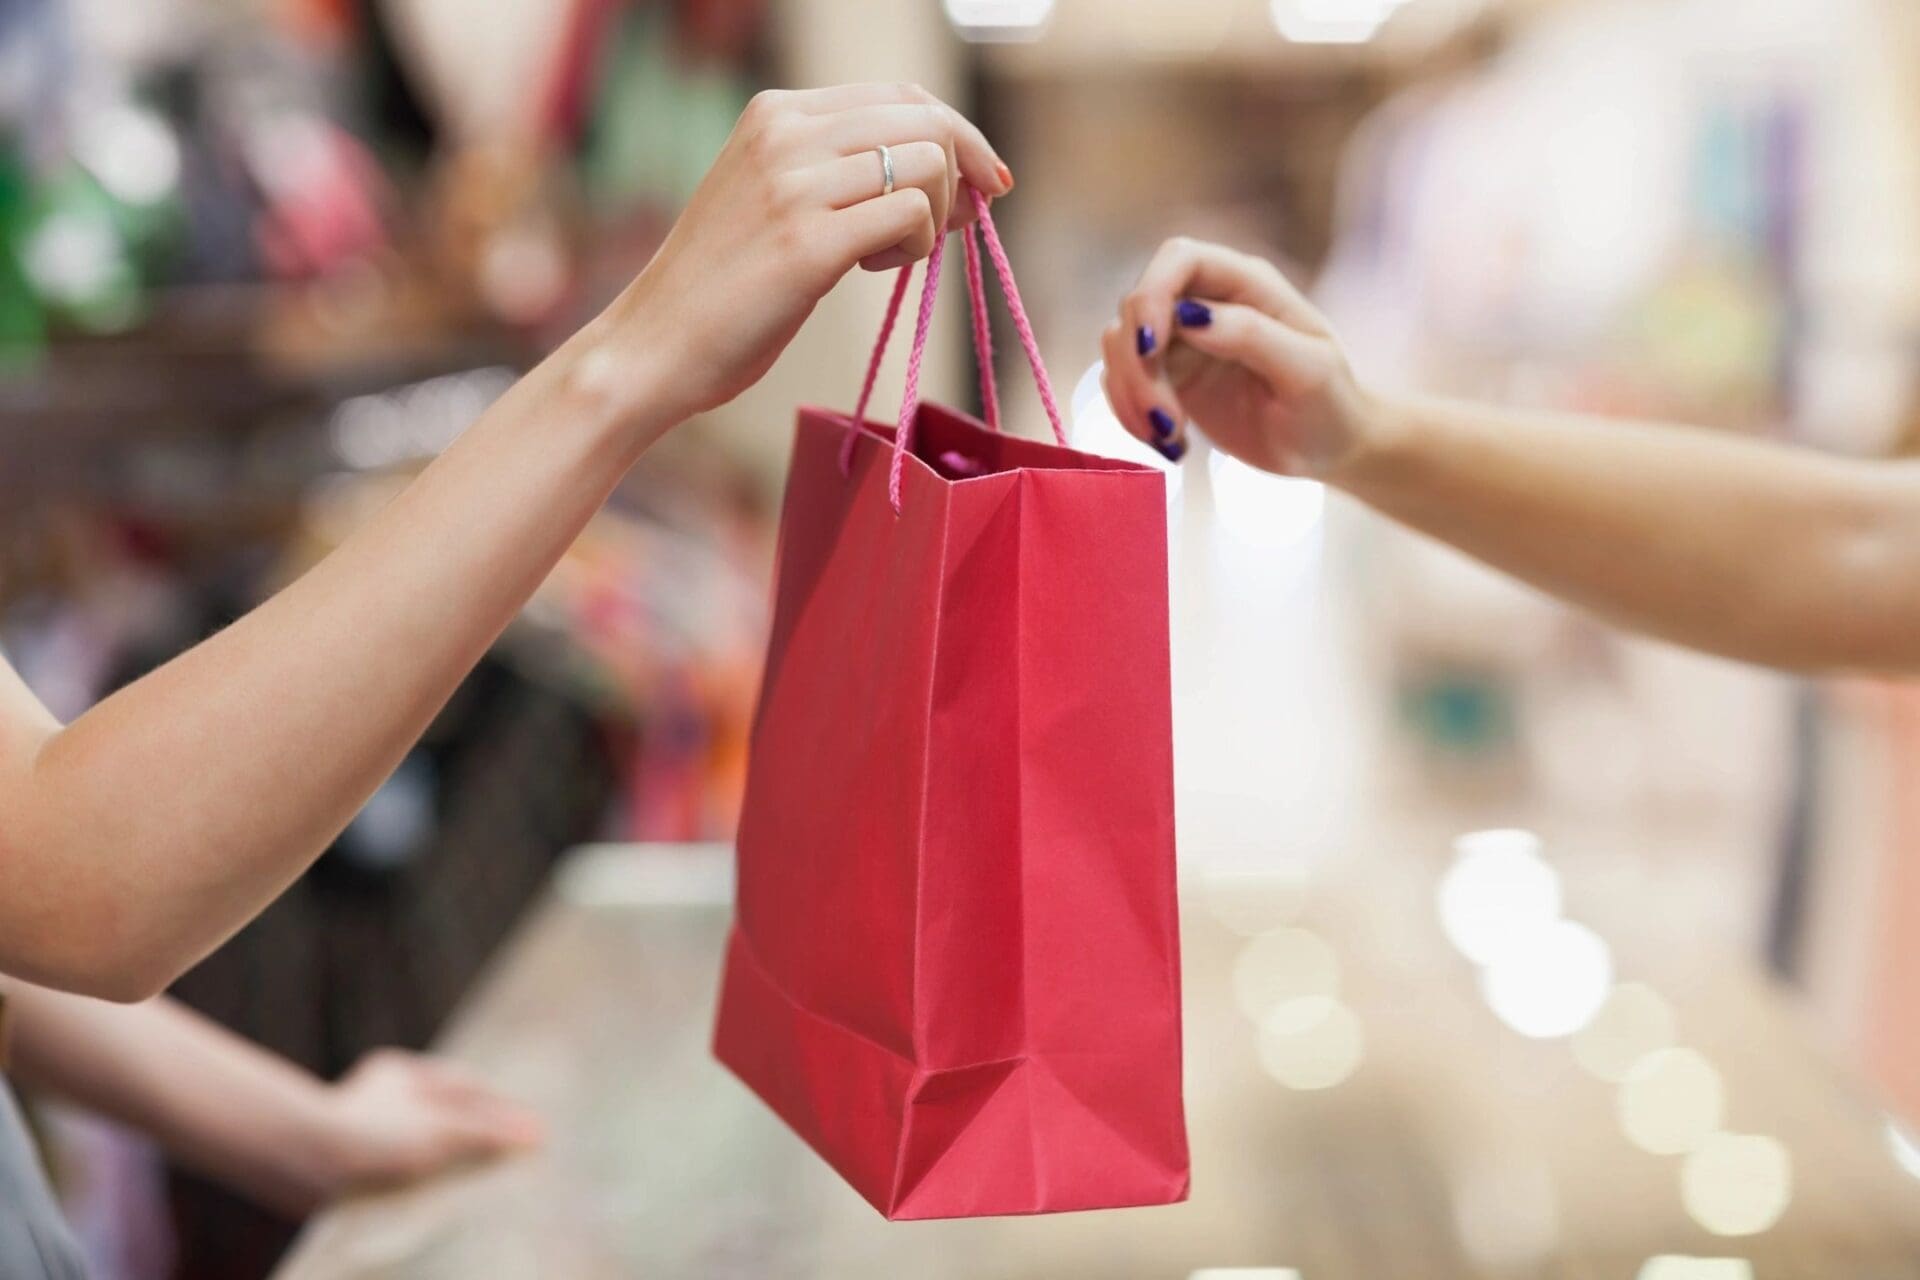 A woman handing a shopping bag to another woman in a store.